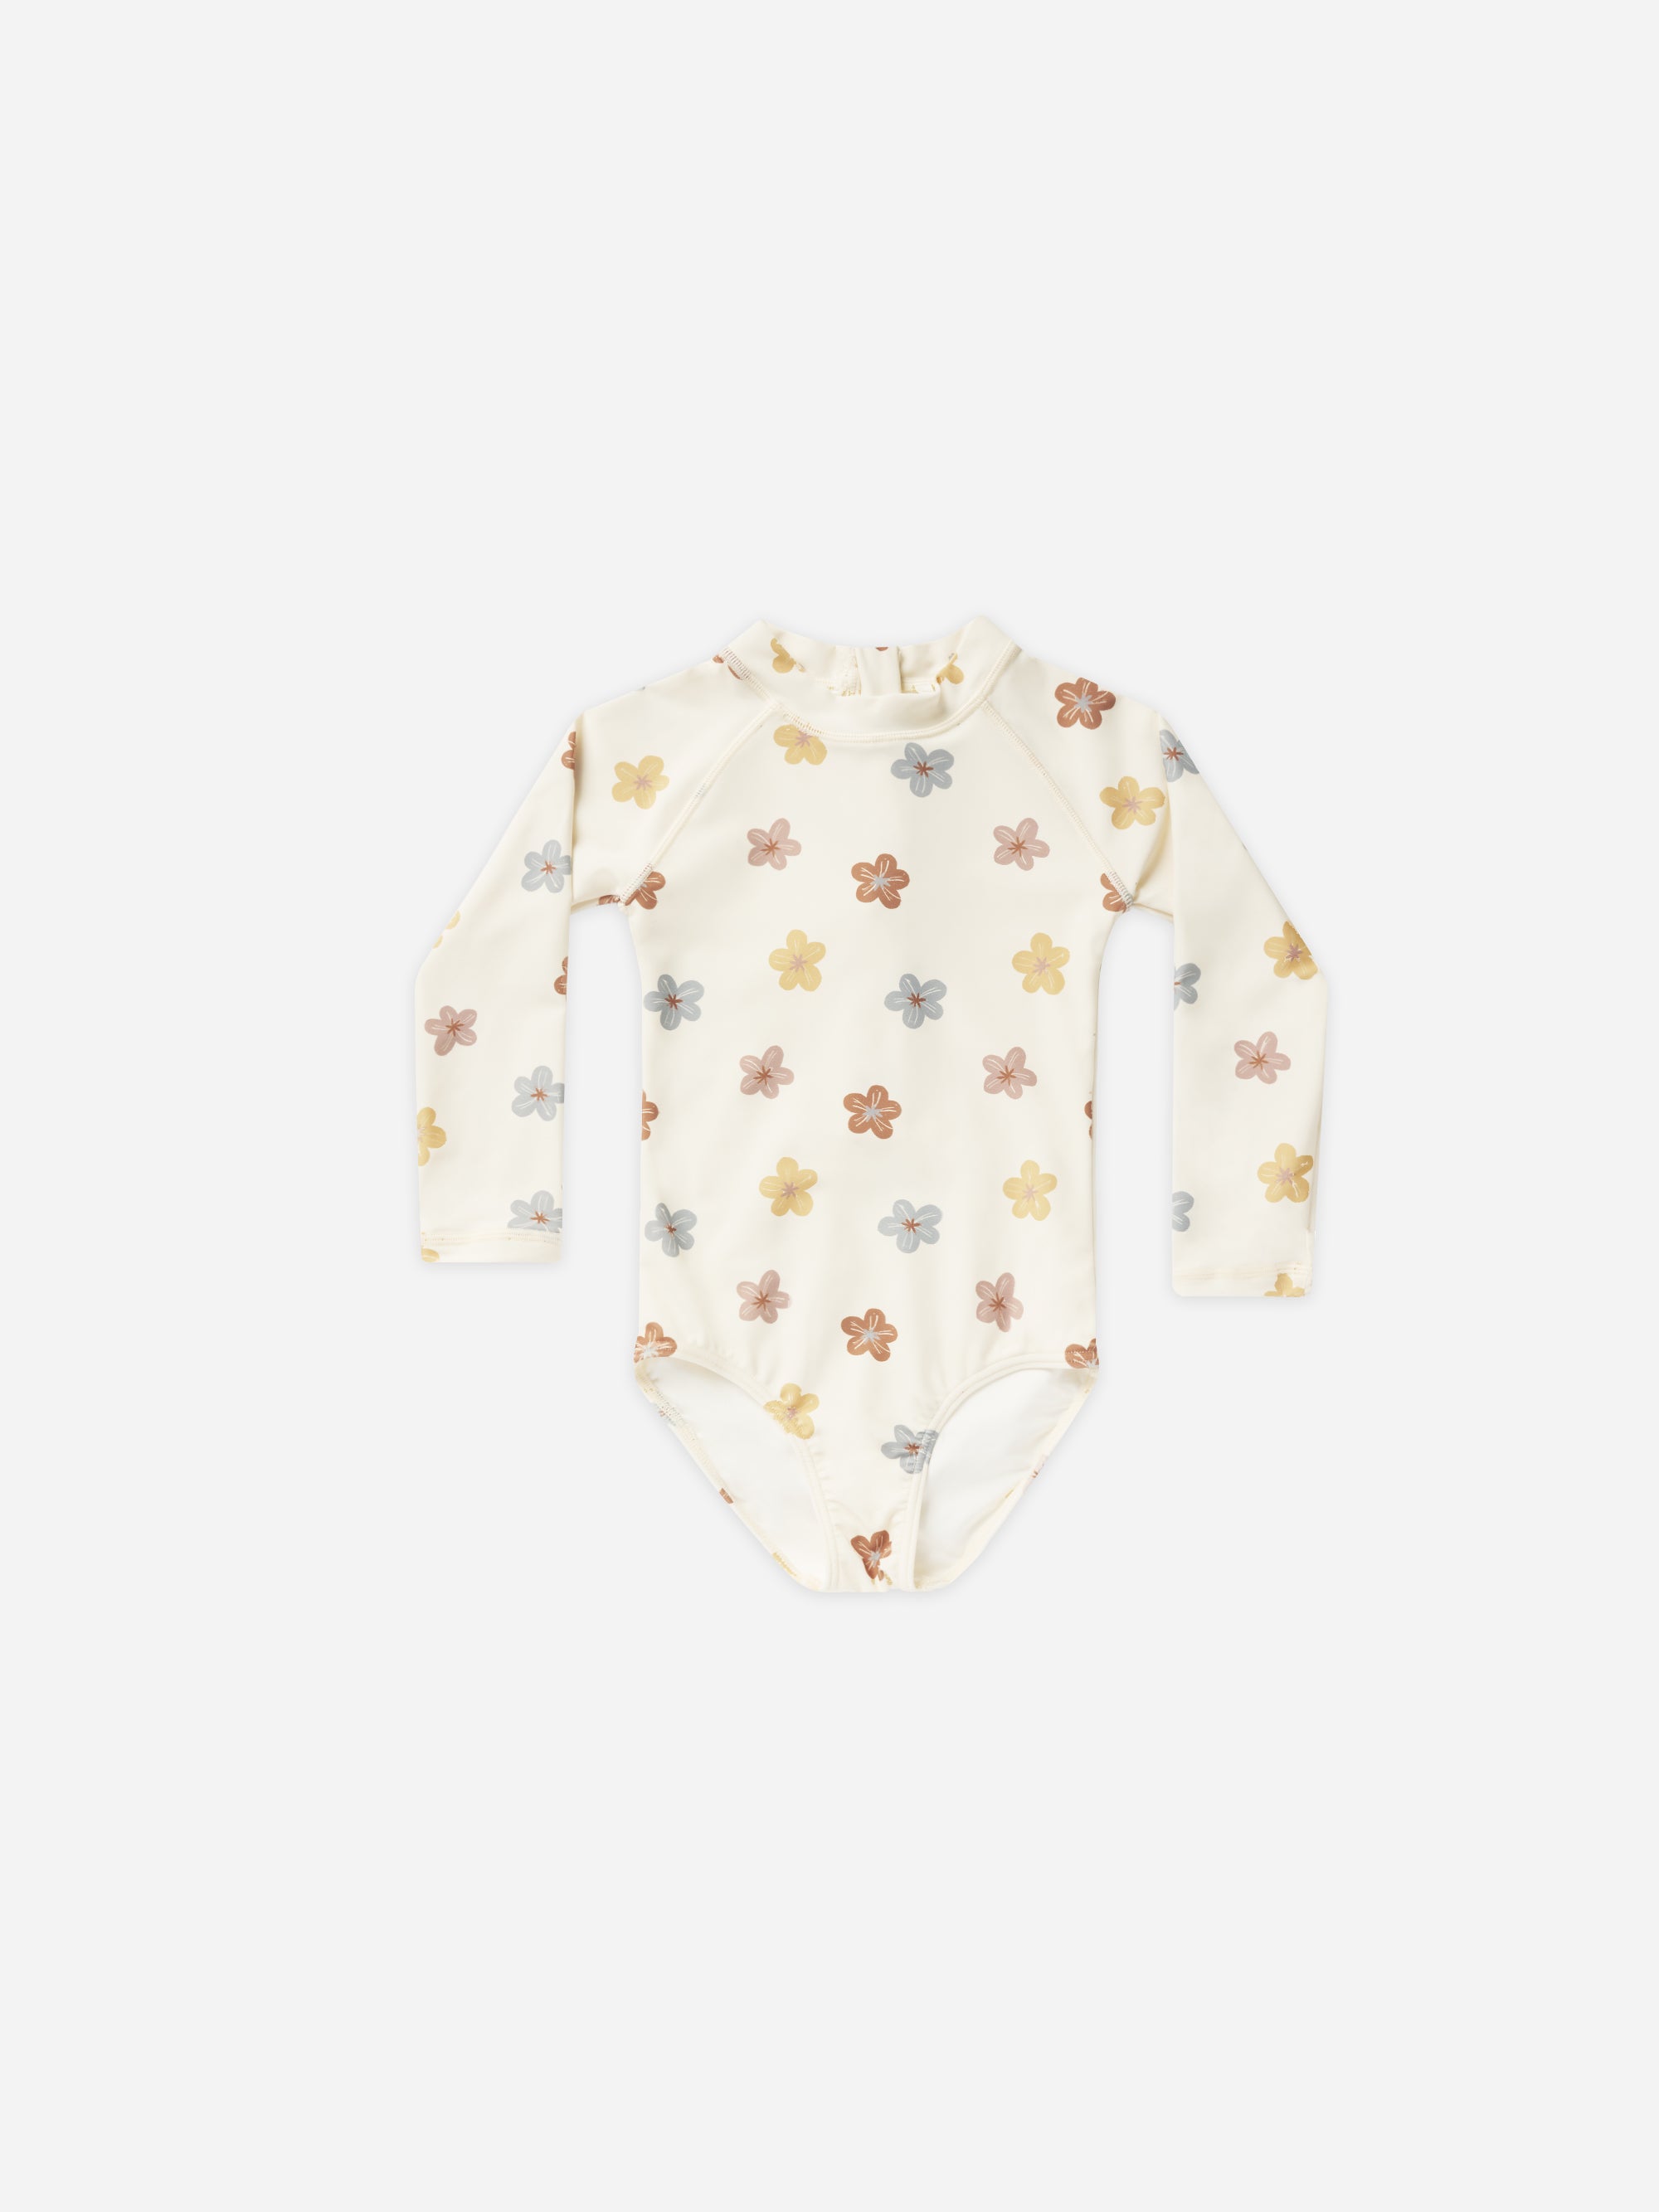 Delphine Rash Guard One-Piece || Leilani - Rylee + Cru | Kids Clothes | Trendy Baby Clothes | Modern Infant Outfits |